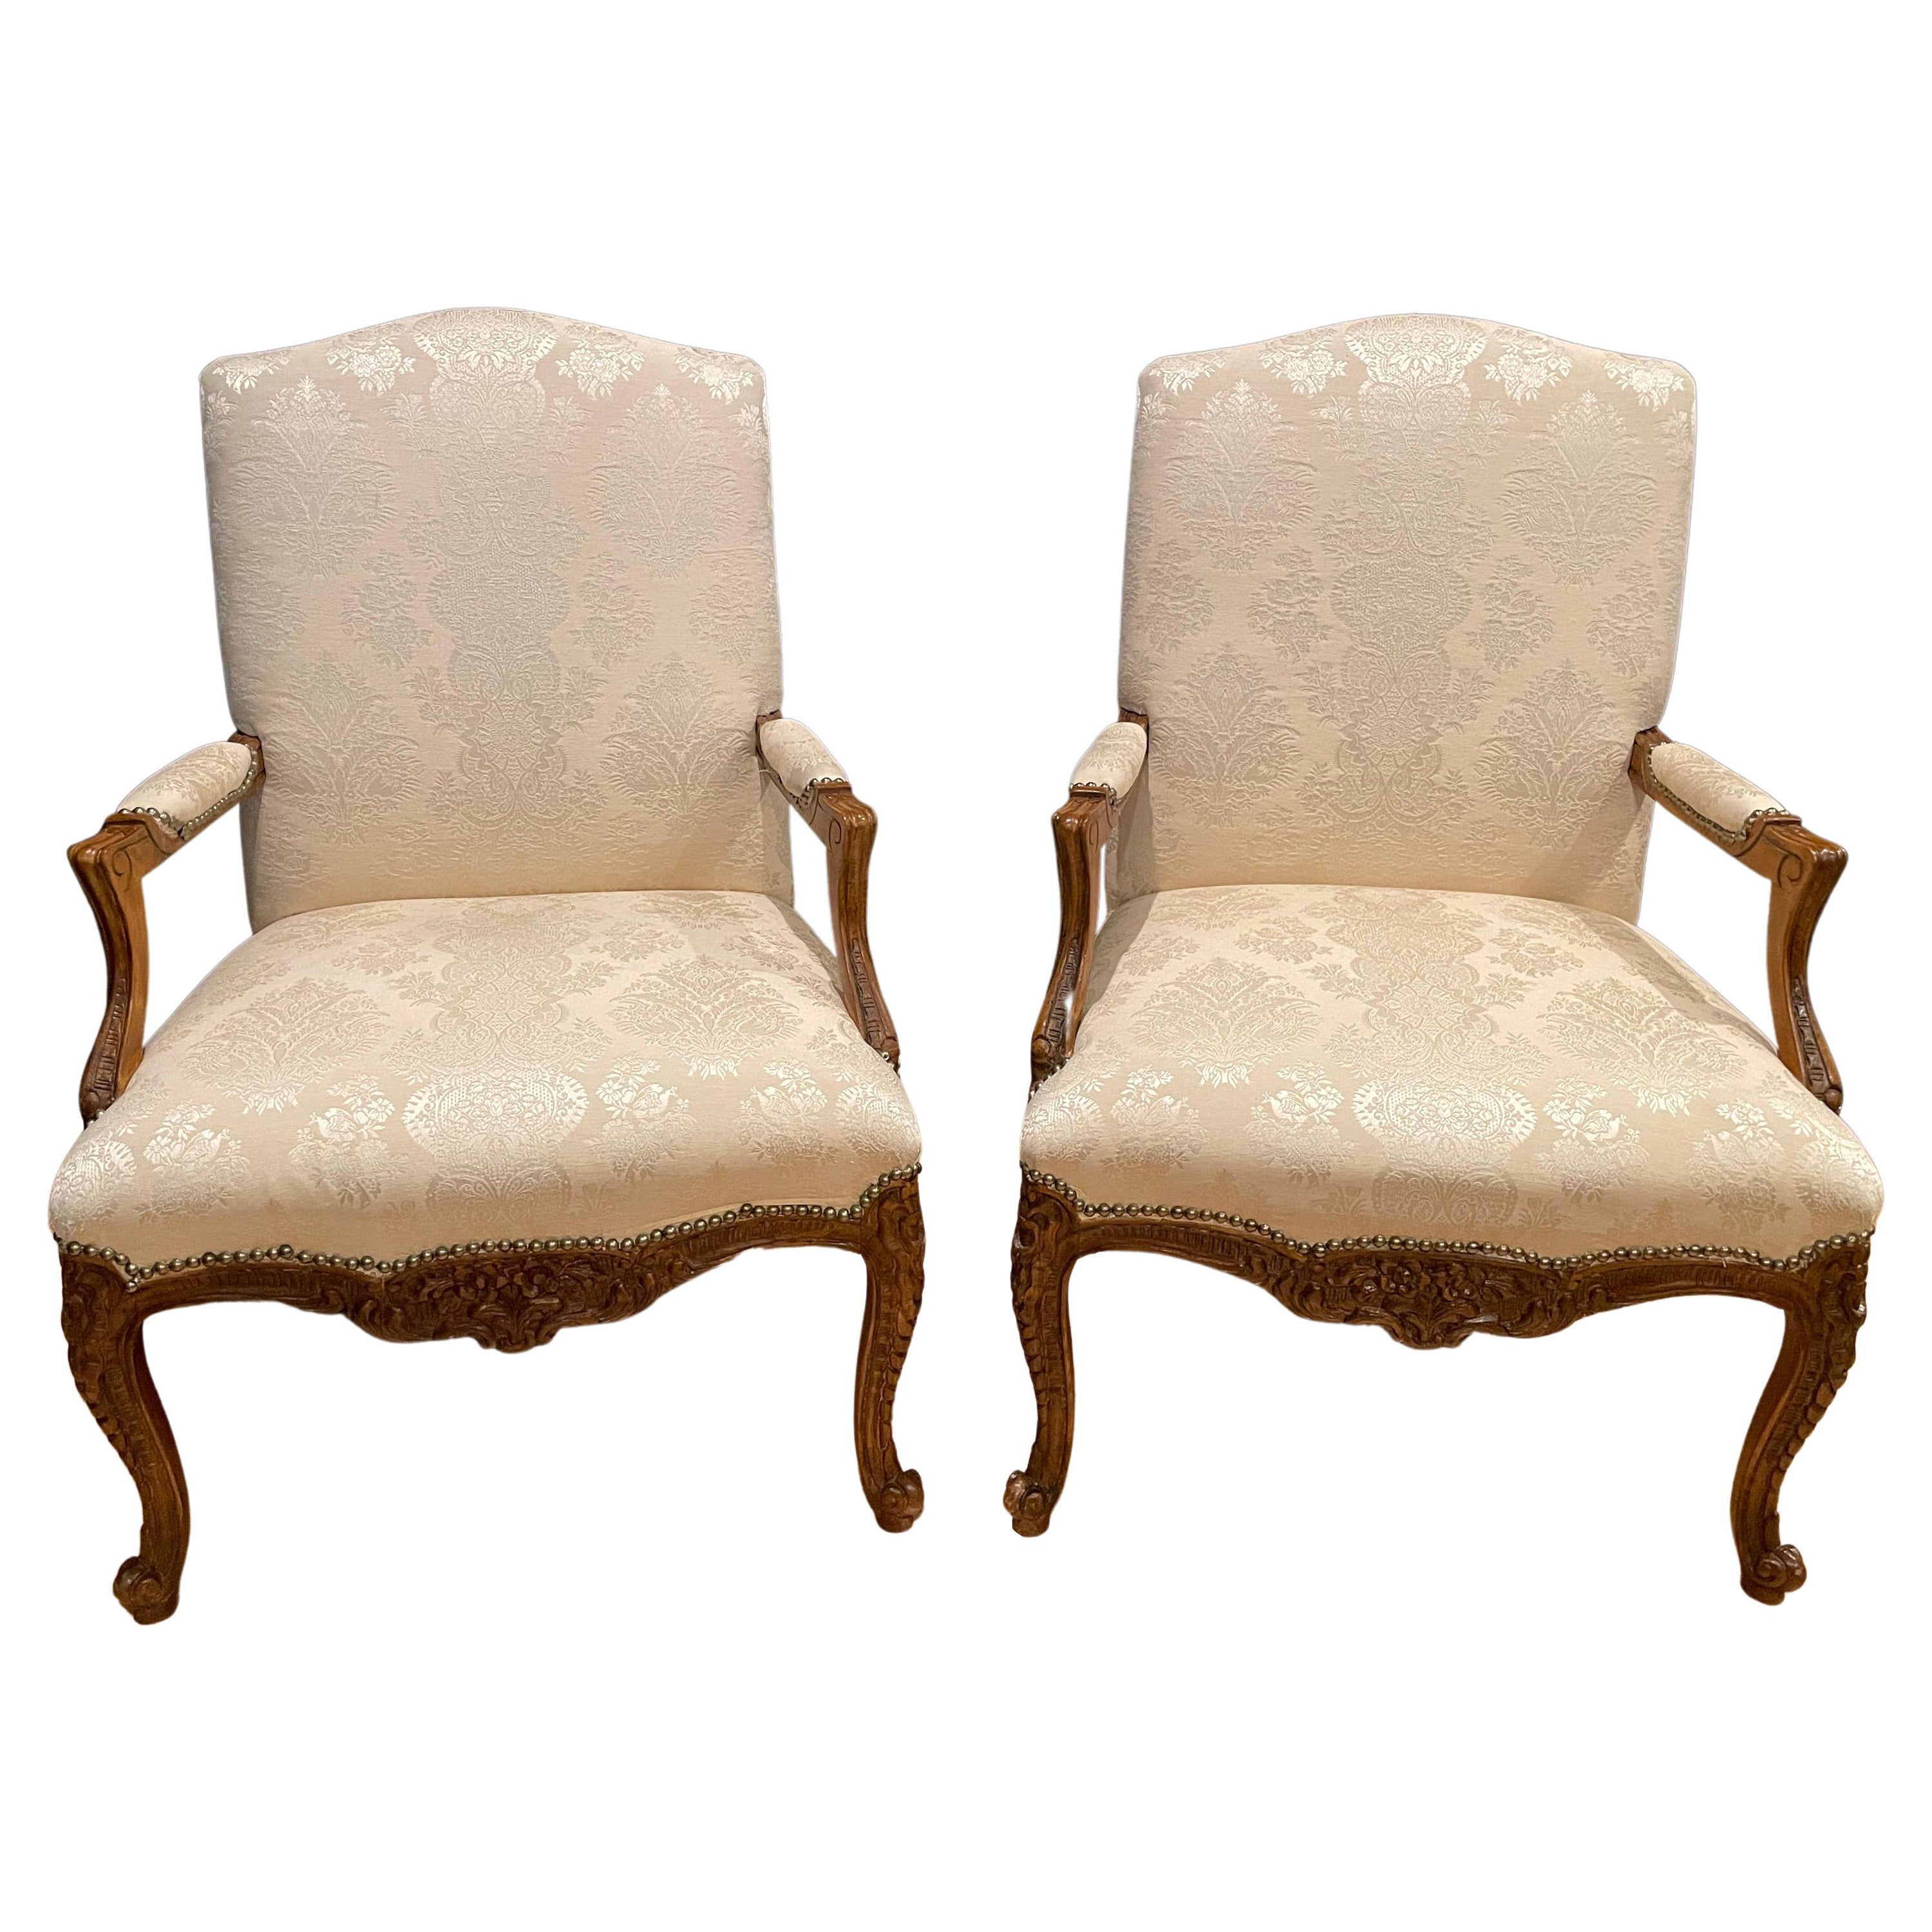 Pair of Louis XV Carved Walnut Fauteuils